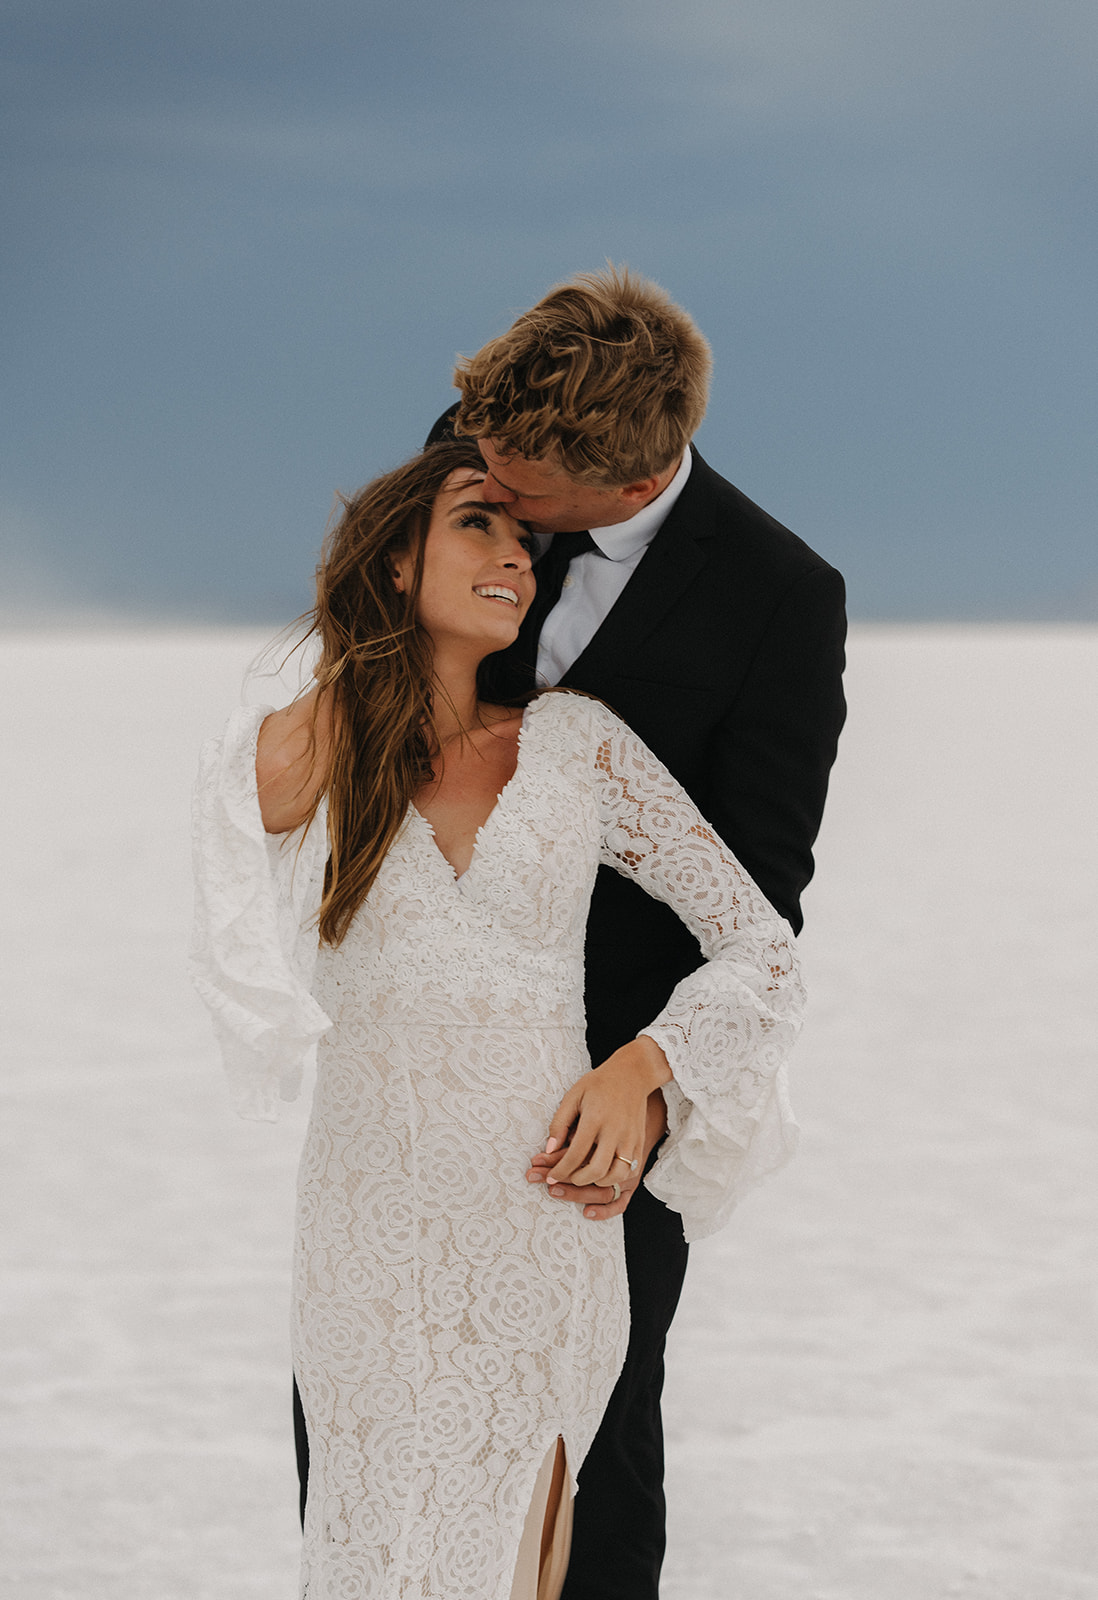 Newlyweds share an intimate moment standing together and kissing the bride's forehead during their Salt Flats Elopement